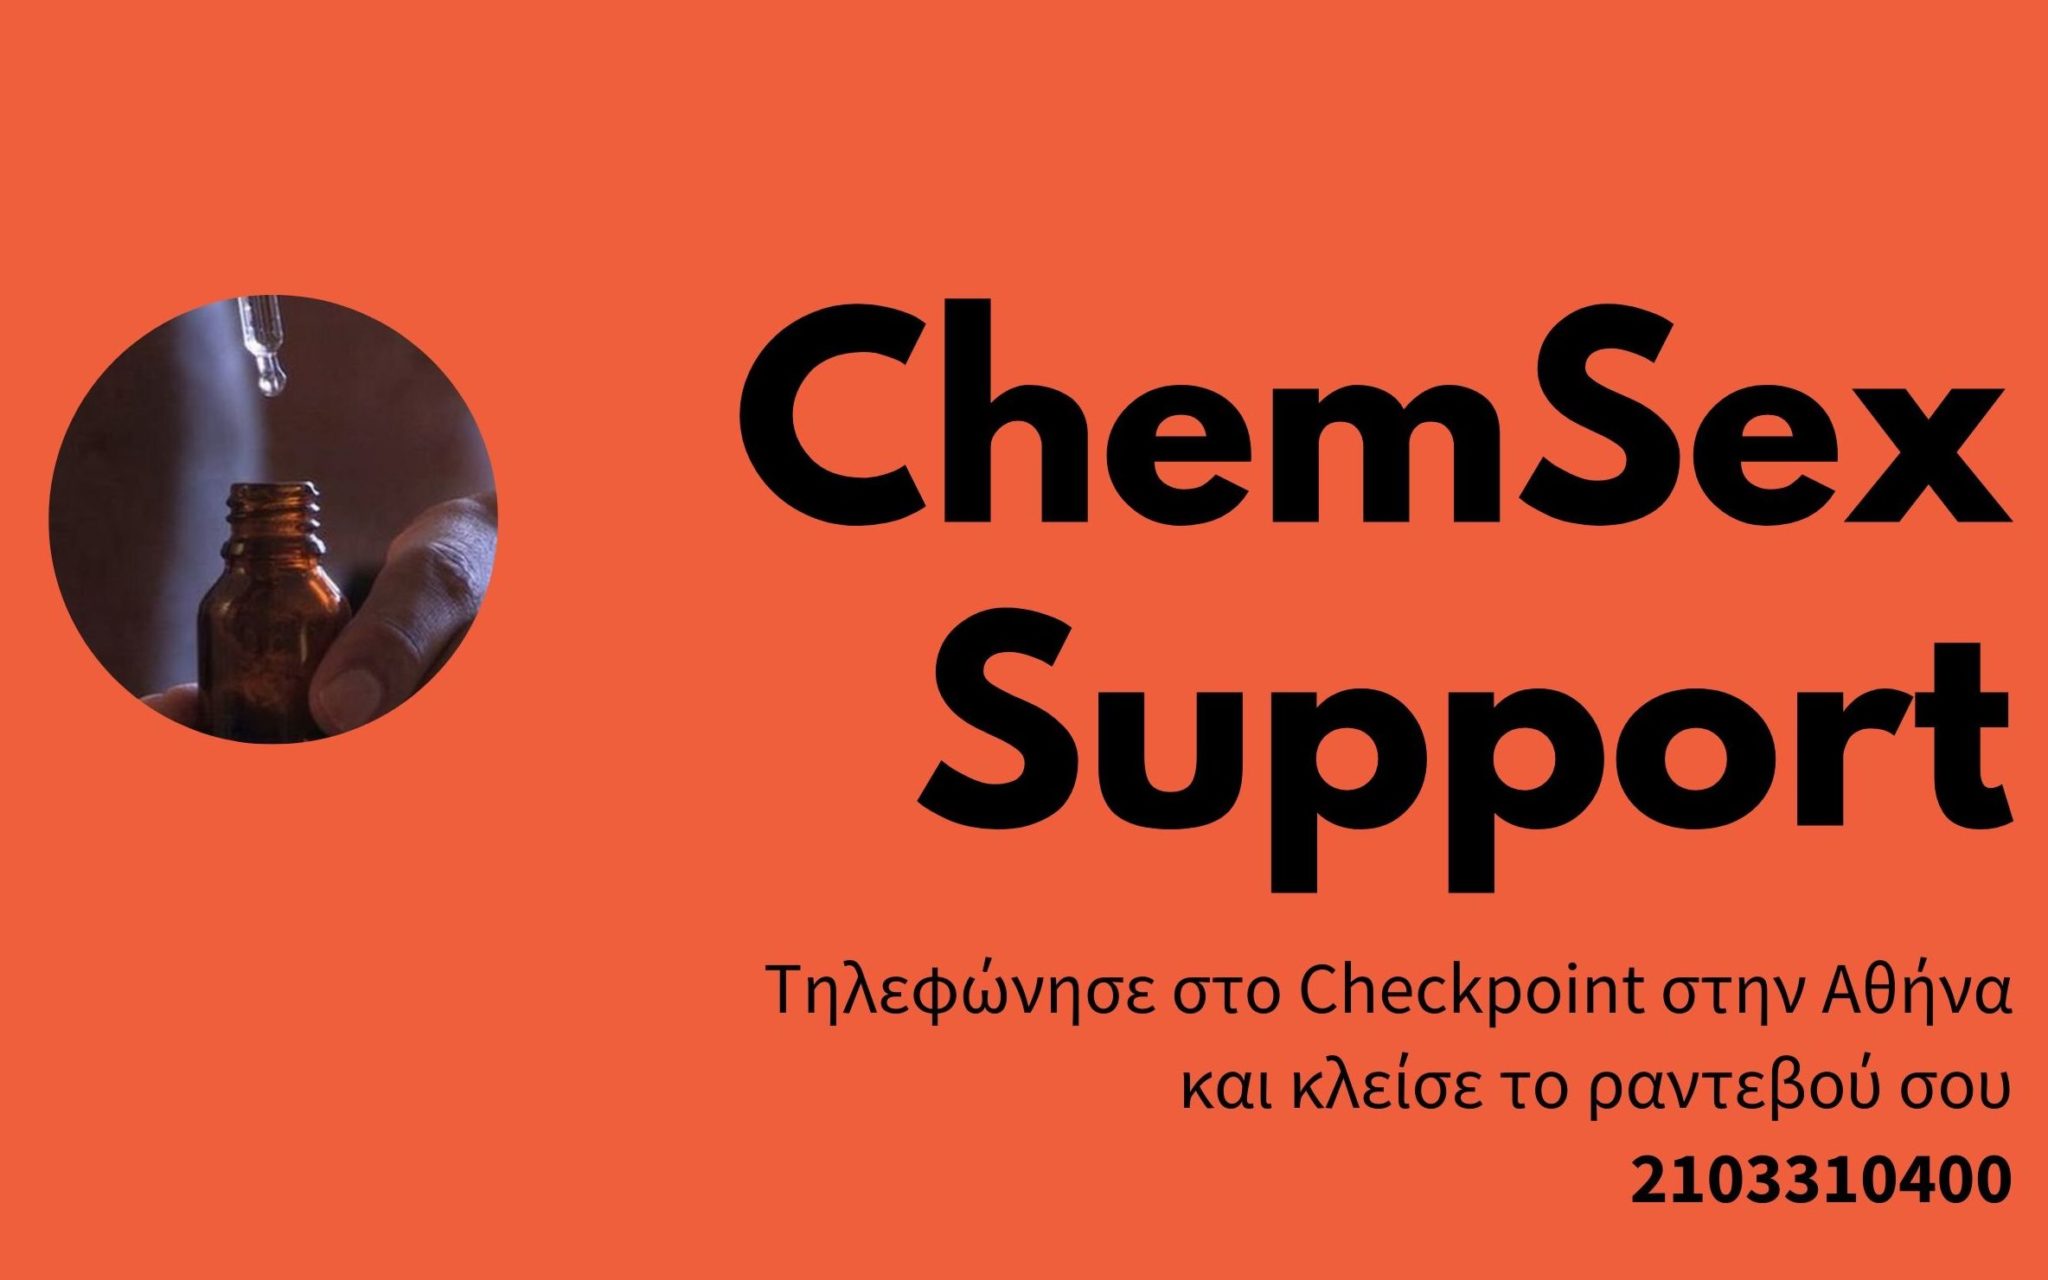 Featured image for “Tα Checkpoint εγκαινιάζουν στην Αθήνα τη νέα υπηρεσία “ChemSex Support””